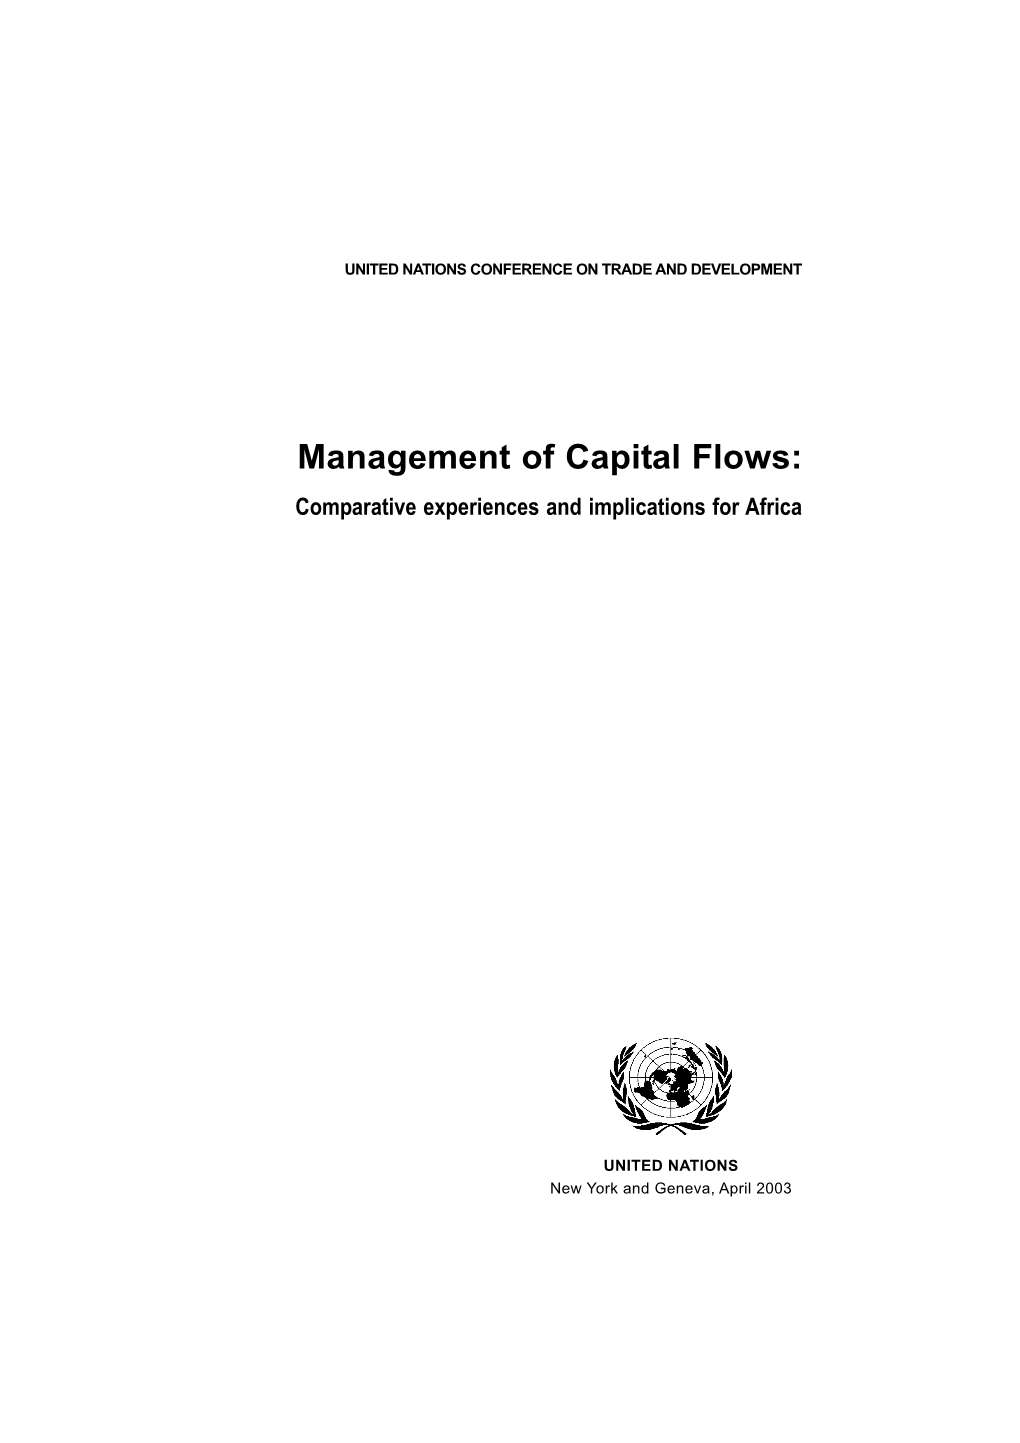 Management of Capital Flows: Comparative Experiences and Implications for Africa